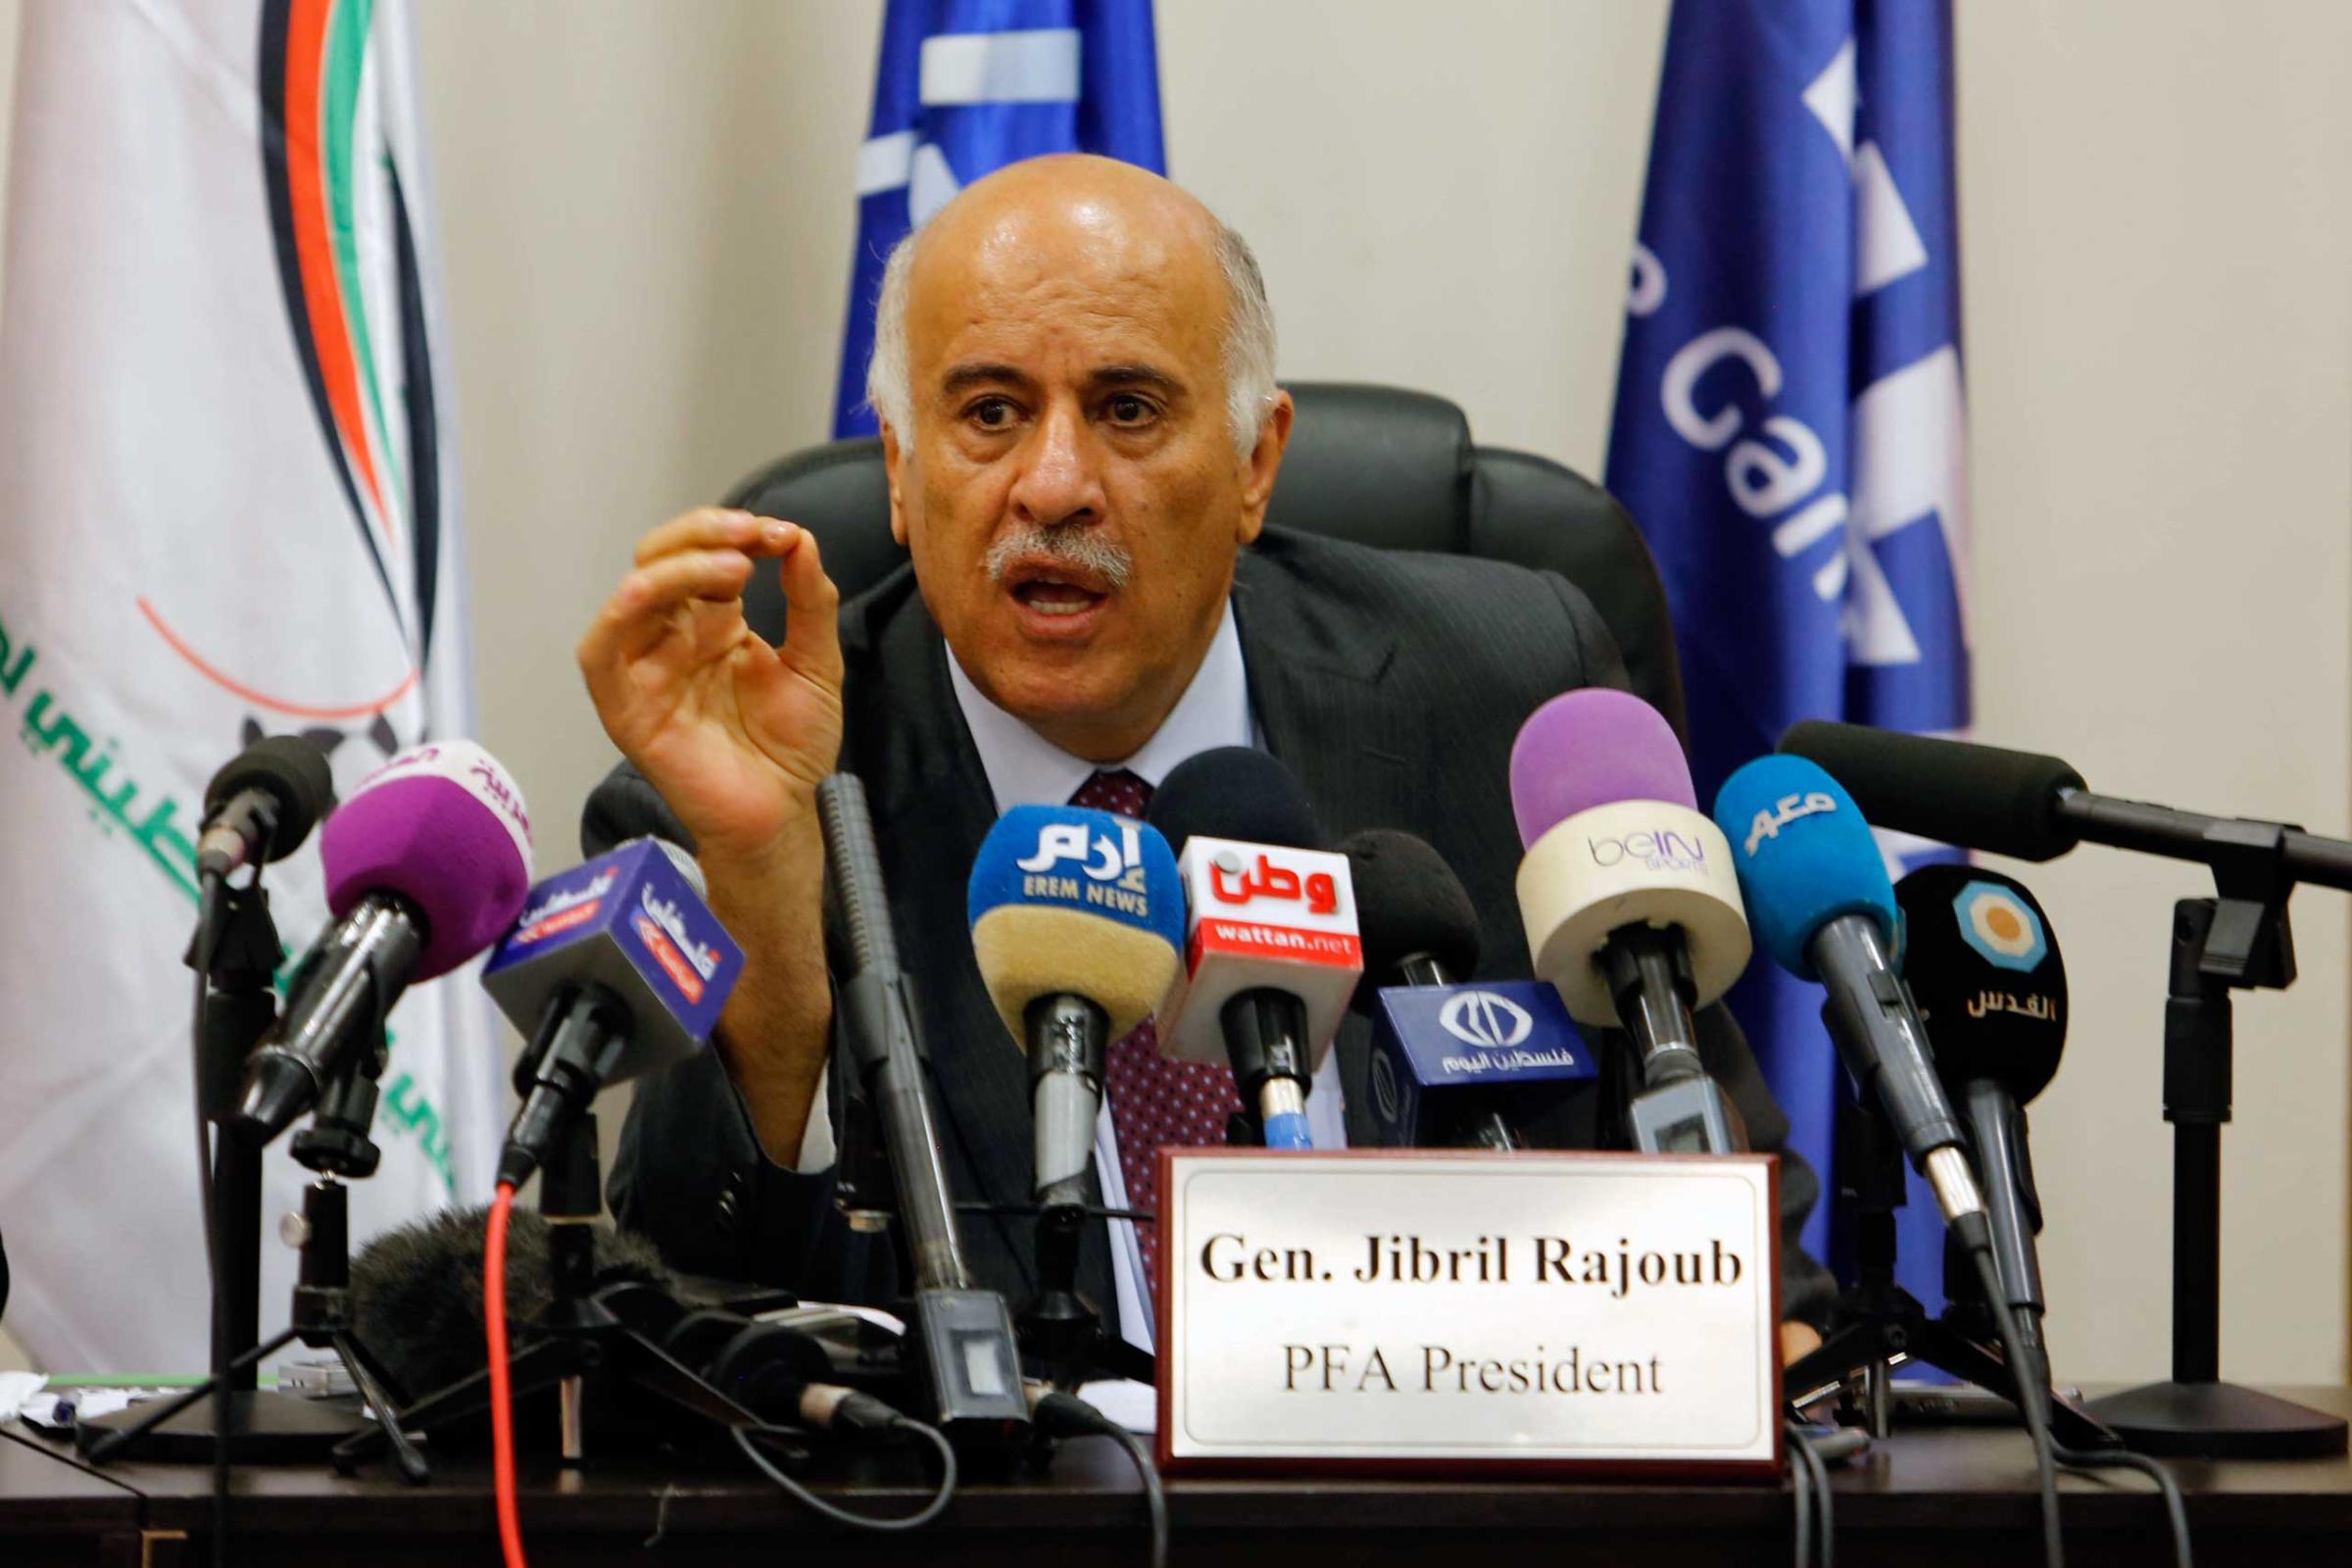 Head of Palestinian football Association Jibril Rajoub speaks during a press conference in Ramallah in the West Bank on May 25, 2015.